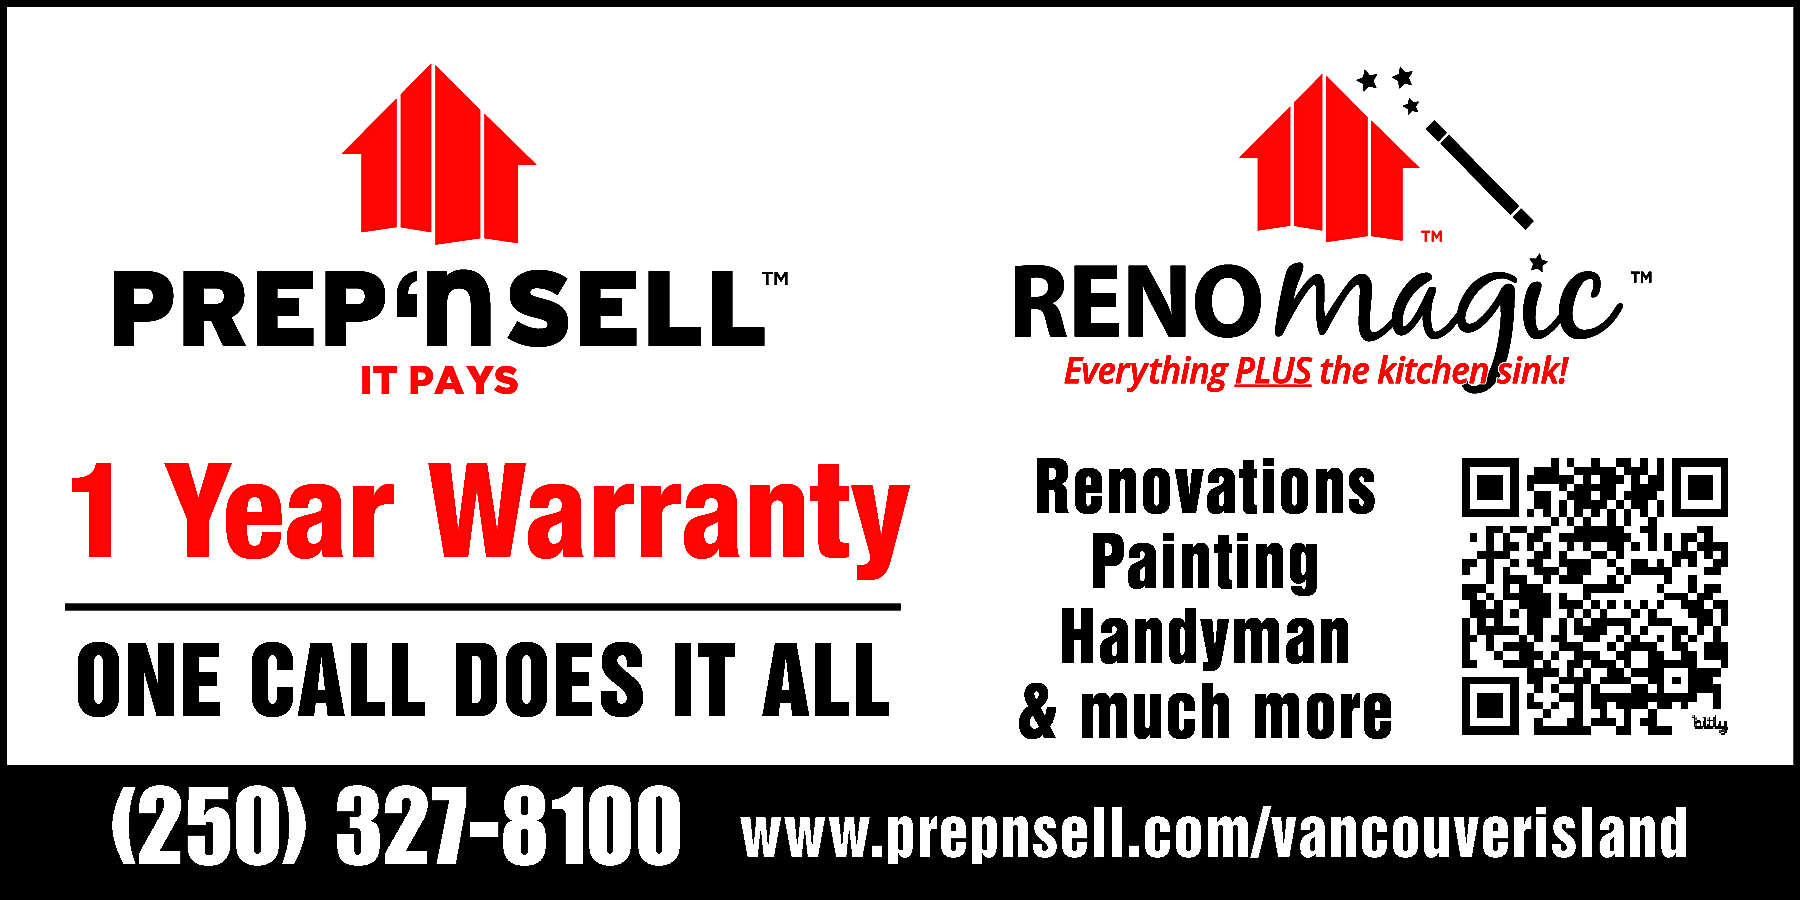 Painting & Handyman <br> <br>prep  Painting & Handyman    prep n sell reno magic    www.prepnsell.com/vancouverisland  TM    TM    IT PAYS    IT PAYS    1 Year Warranty  (250)  327-8100  1  Year  Warranty  Kitchen & Bathroom    Renovations  Painting  Handyman  ONE CALL DOES IT ALL & much more  www.prepnsell.com/vancouverisland    & Bathroom  (250)Kitchen  327-8100 www.prepnsell.com/vancouverisland  Renovations    